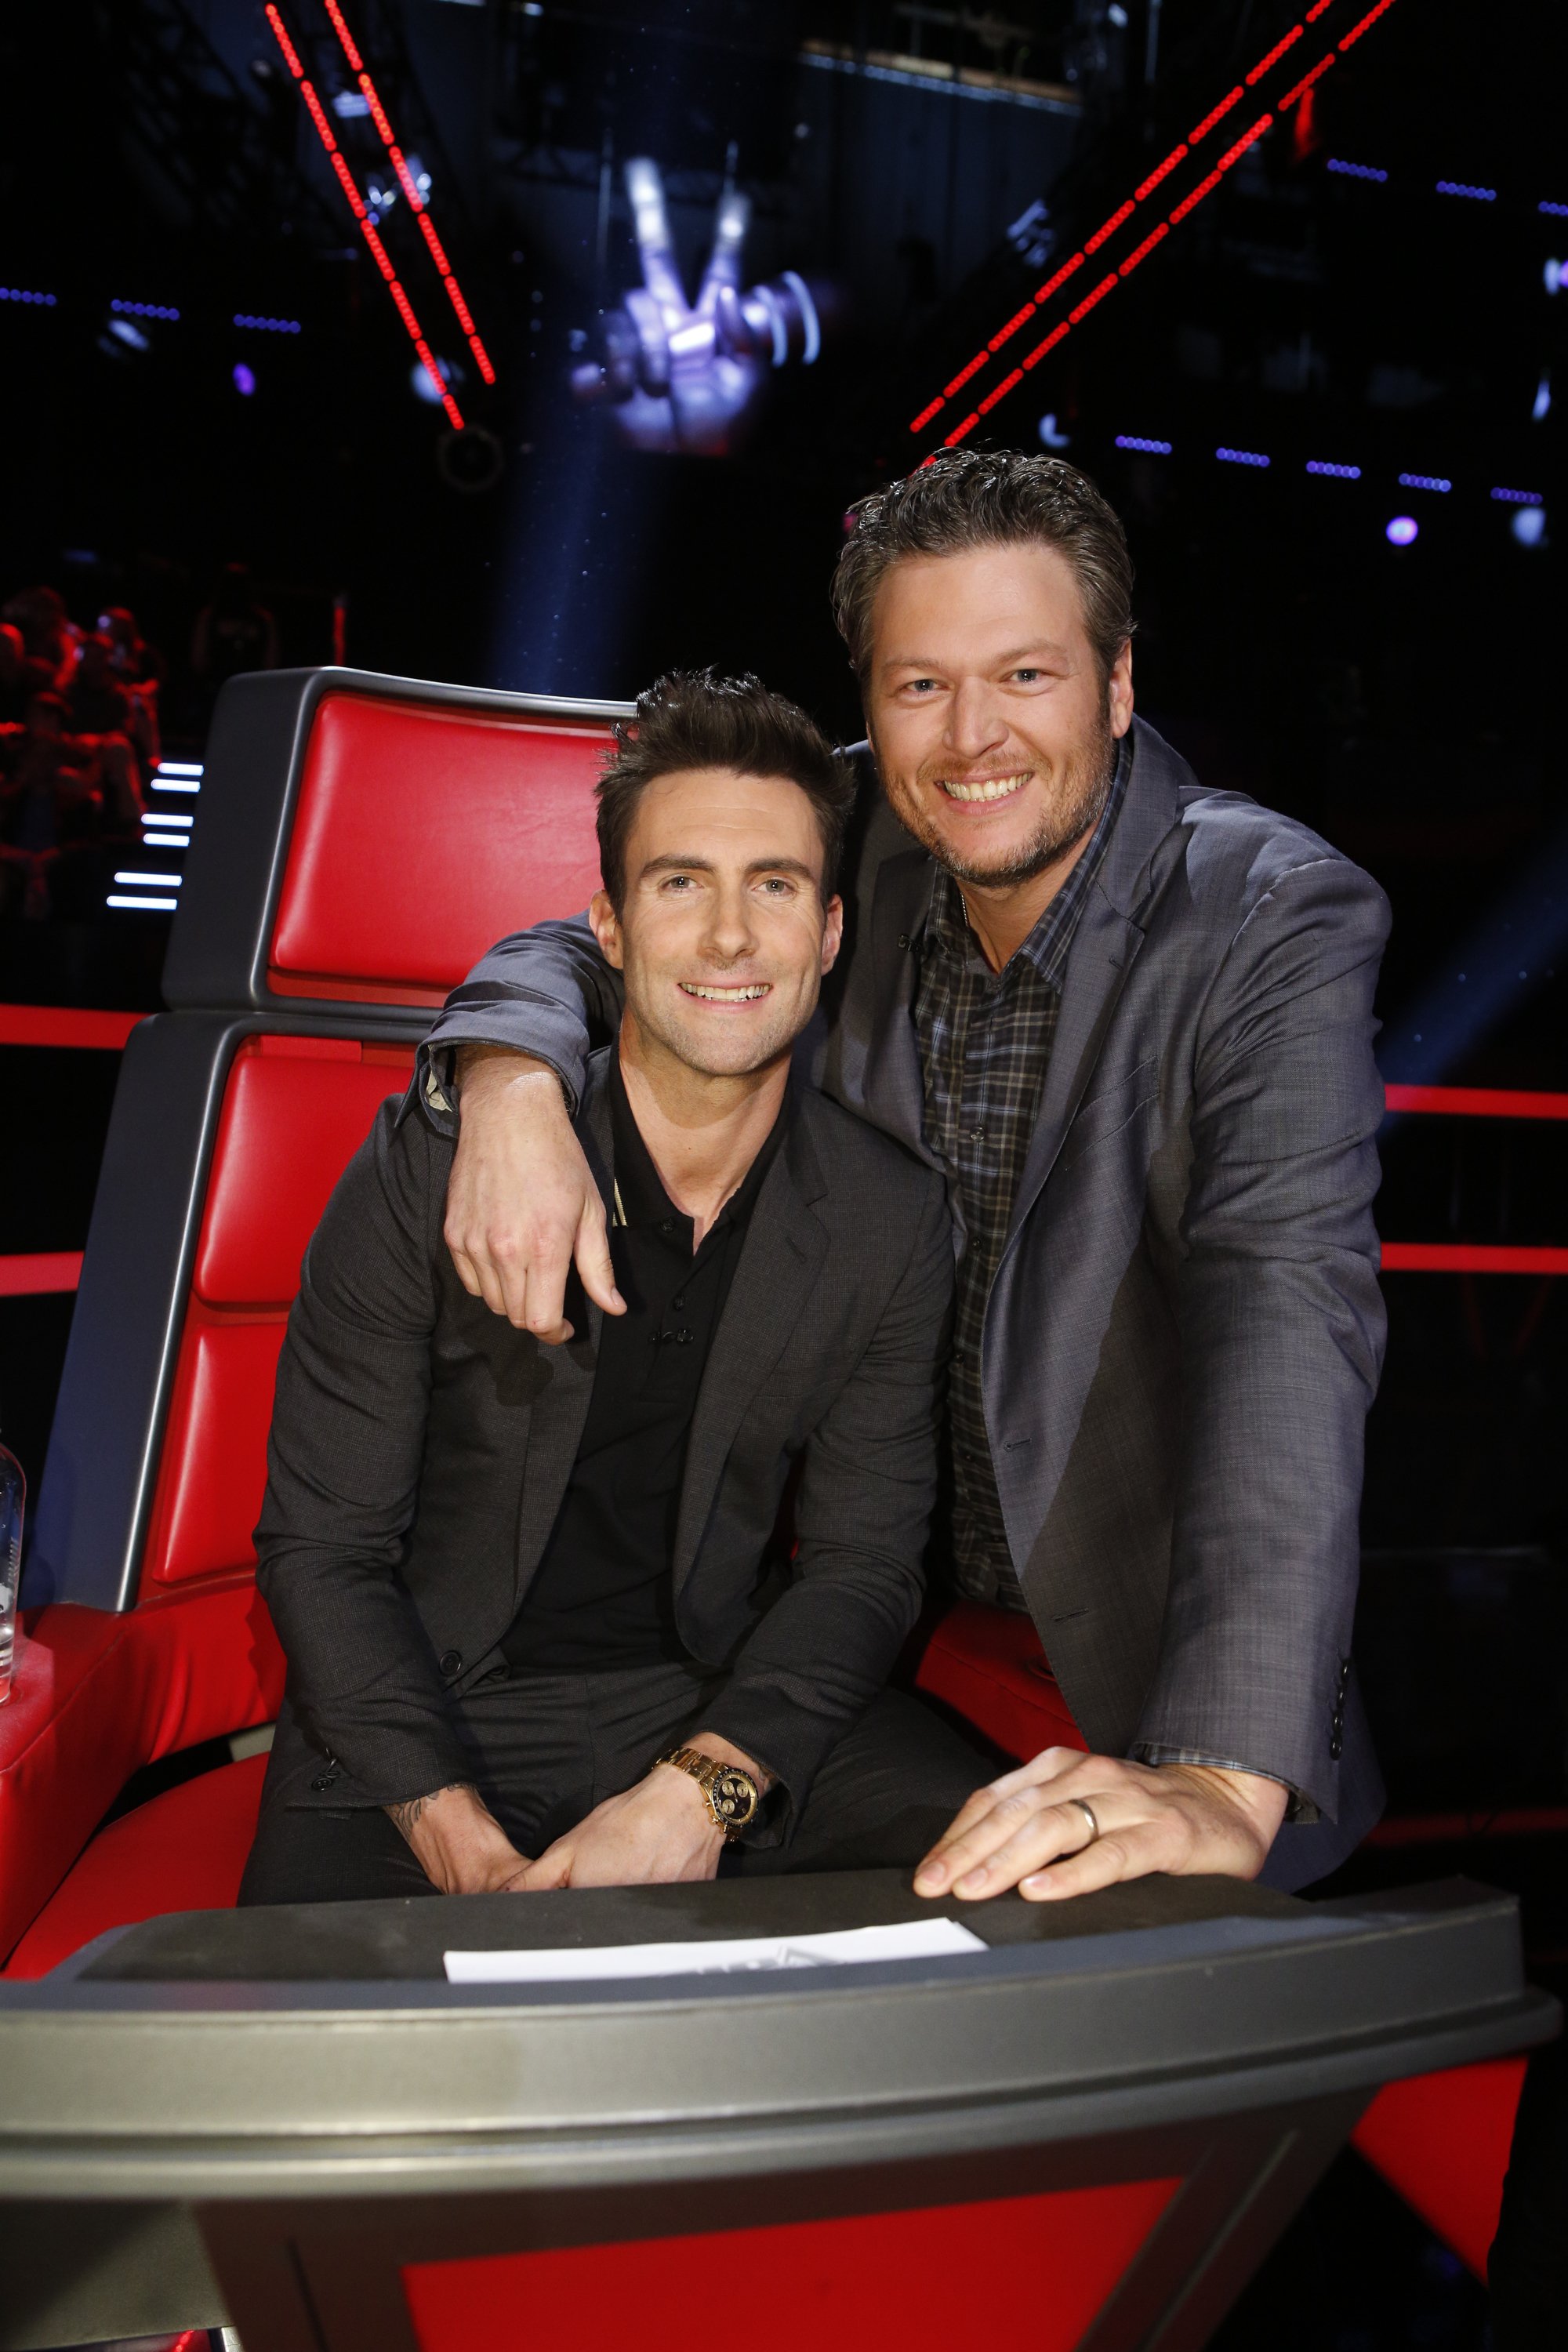 Coaches Adam Levine and Blake Shelton on season 7 of "The Voice." | Source: Getty Images.